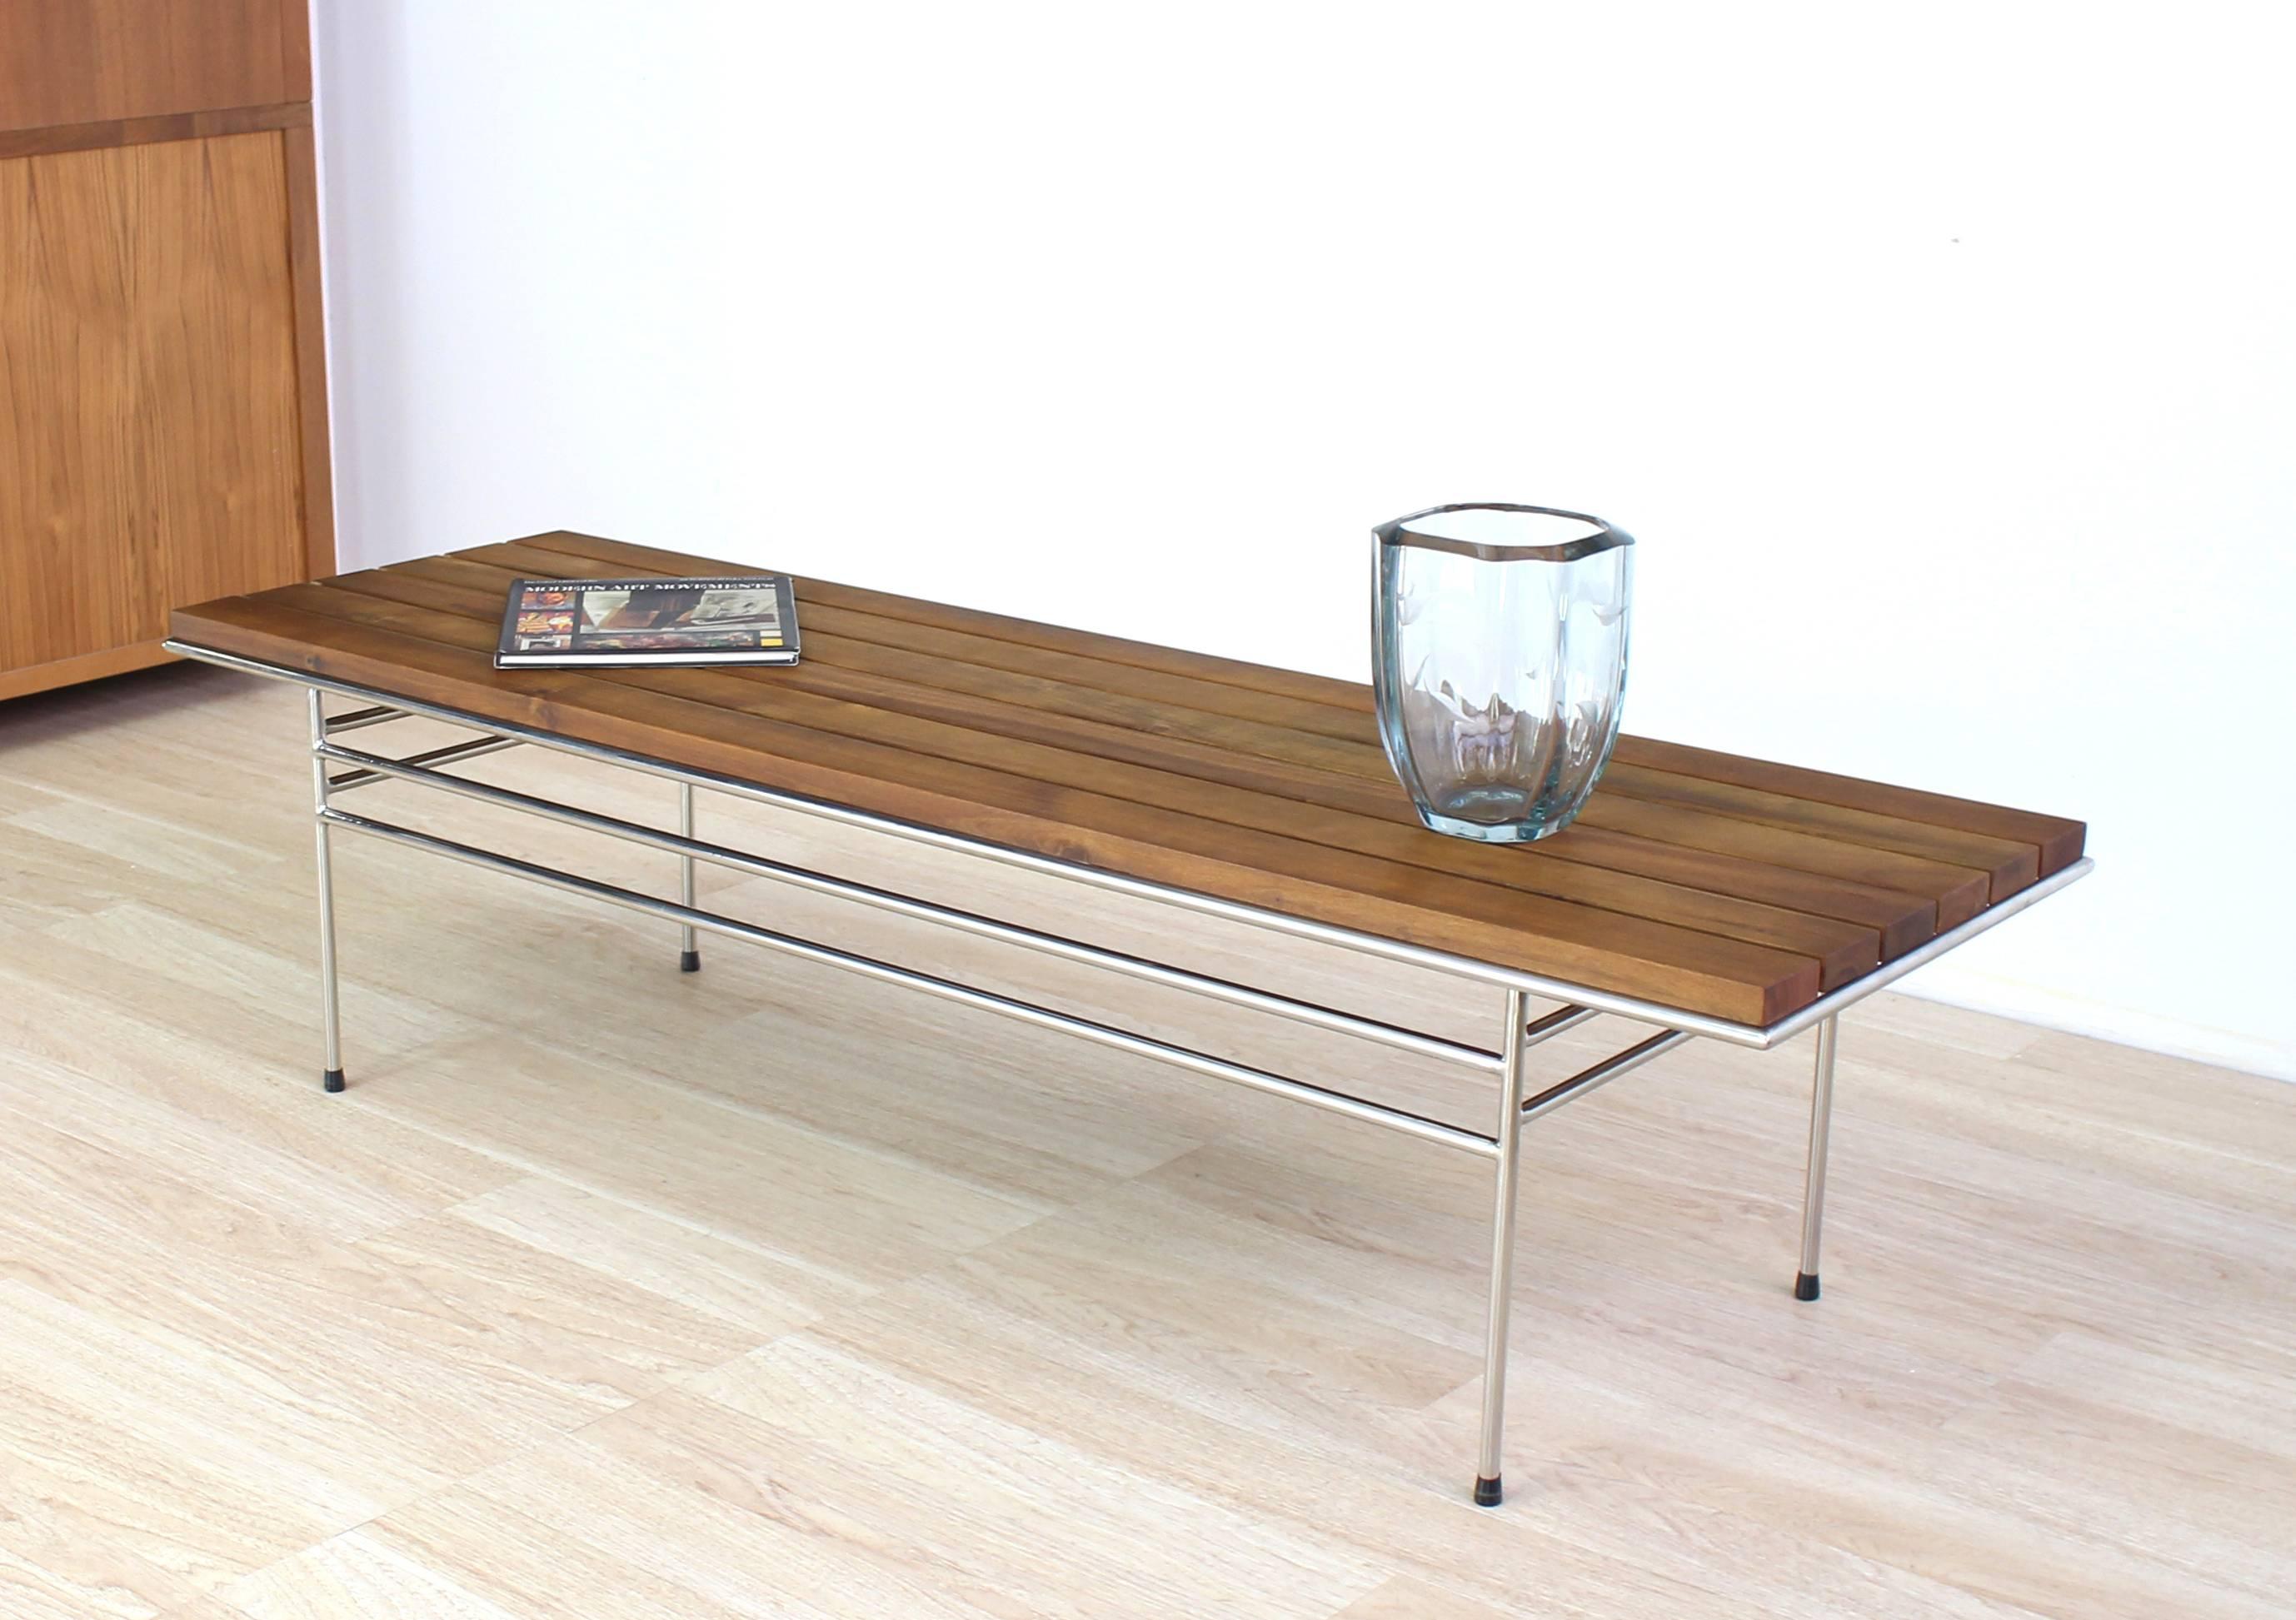 American Solid Oiled Slat Wood Top Chrome Bench For Sale